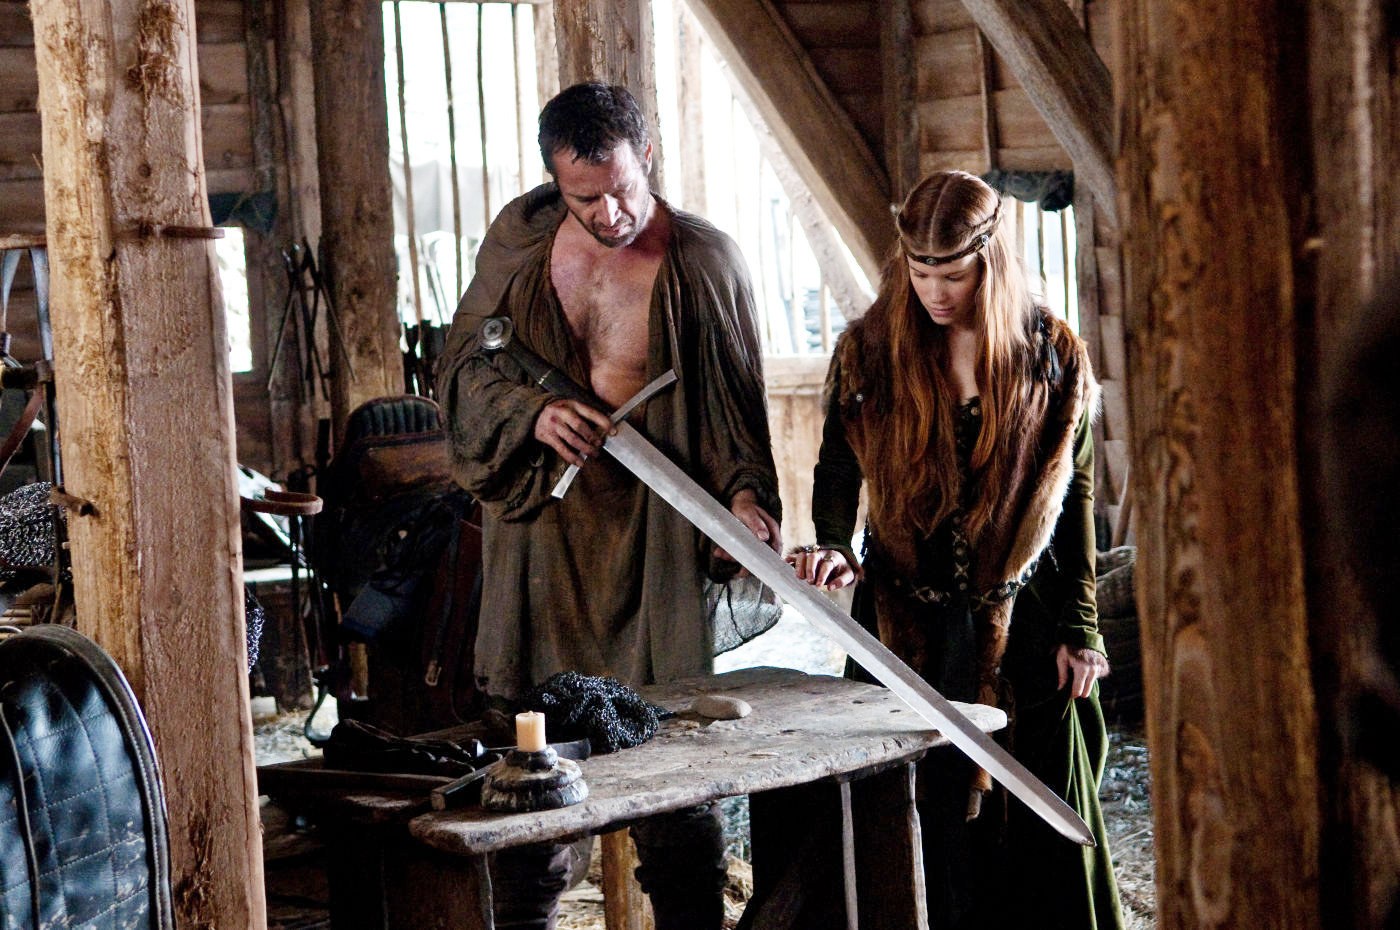 James Purefoy stars as Marshall and Kate Mara stars as Lady Isabel in ARC Entertainment's Ironclad (2011)